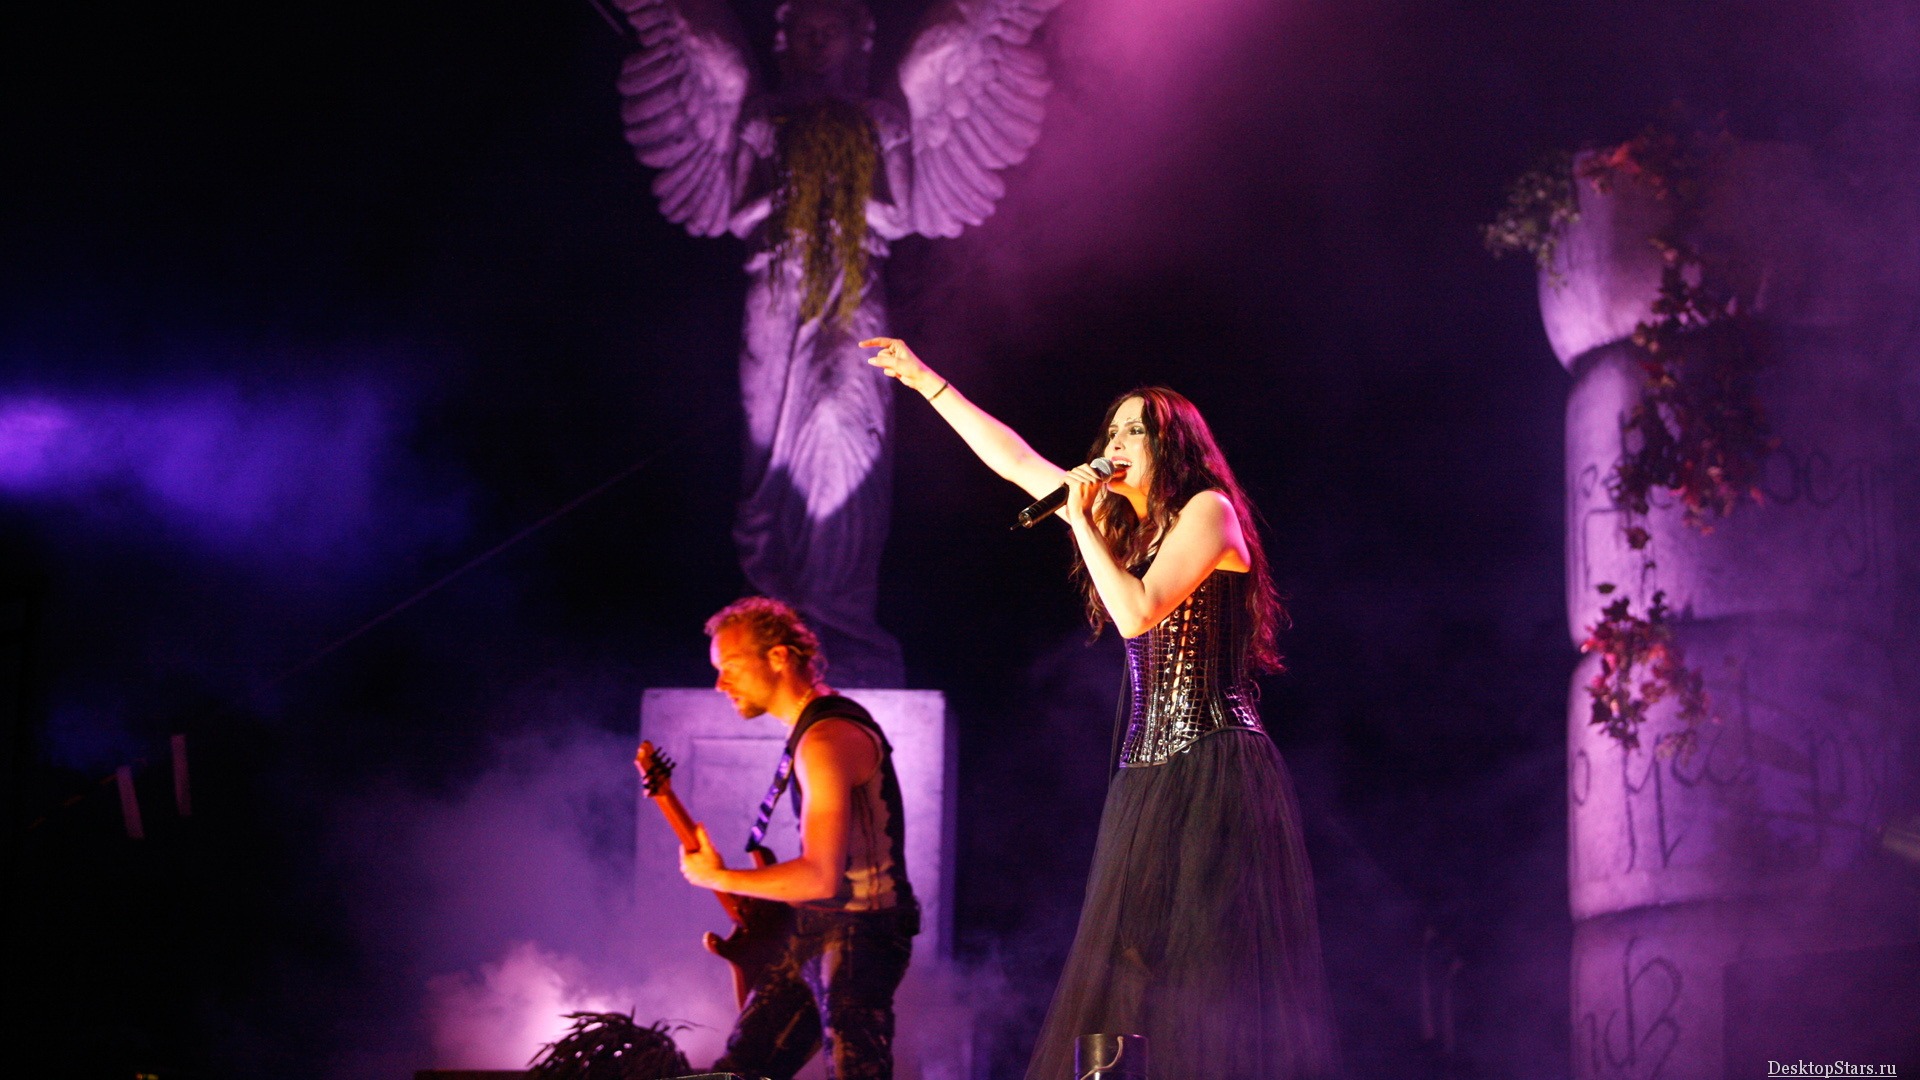 Sharon den Adel #014 - 1920x1080 Wallpapers Pictures Photos Images